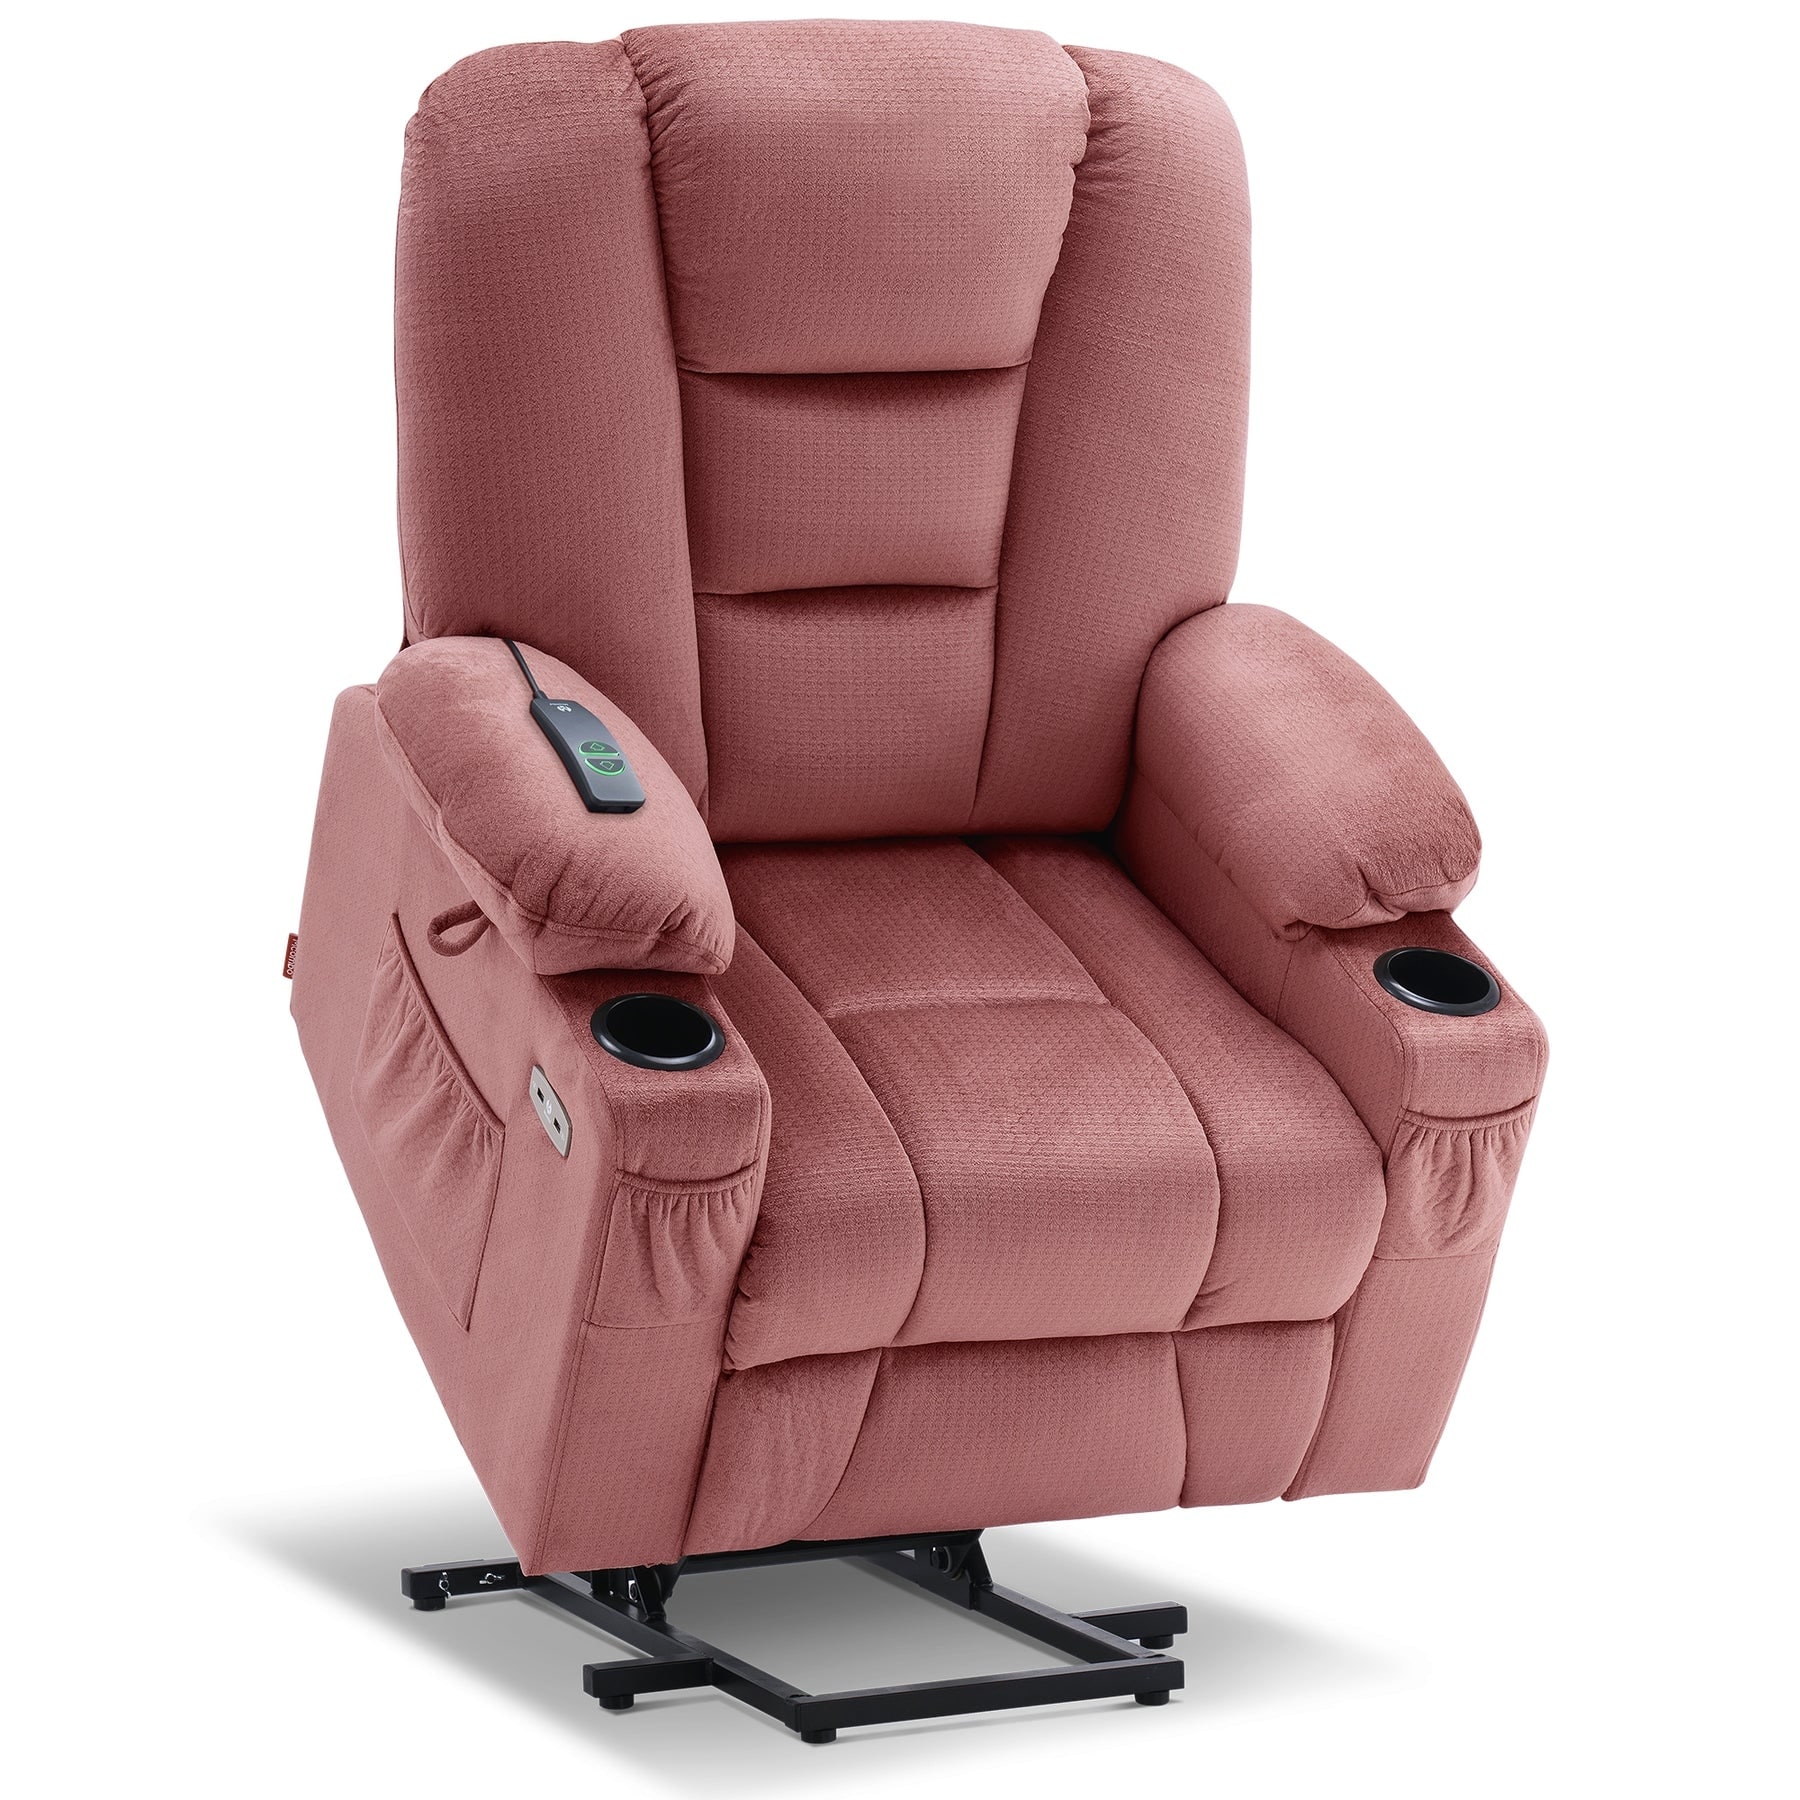 https://ak1.ostkcdn.com/images/products/is/images/direct/a5b1effdd886388e852ca923afcfaf2993f4ec74/Mcombo-Electric-Power-Lift-Recliner-Chair-with-Massage-and-Heat-for-Elderly%2C-Extended-Footrest%2C-USB-Ports%2C-Fabric-7529.jpg